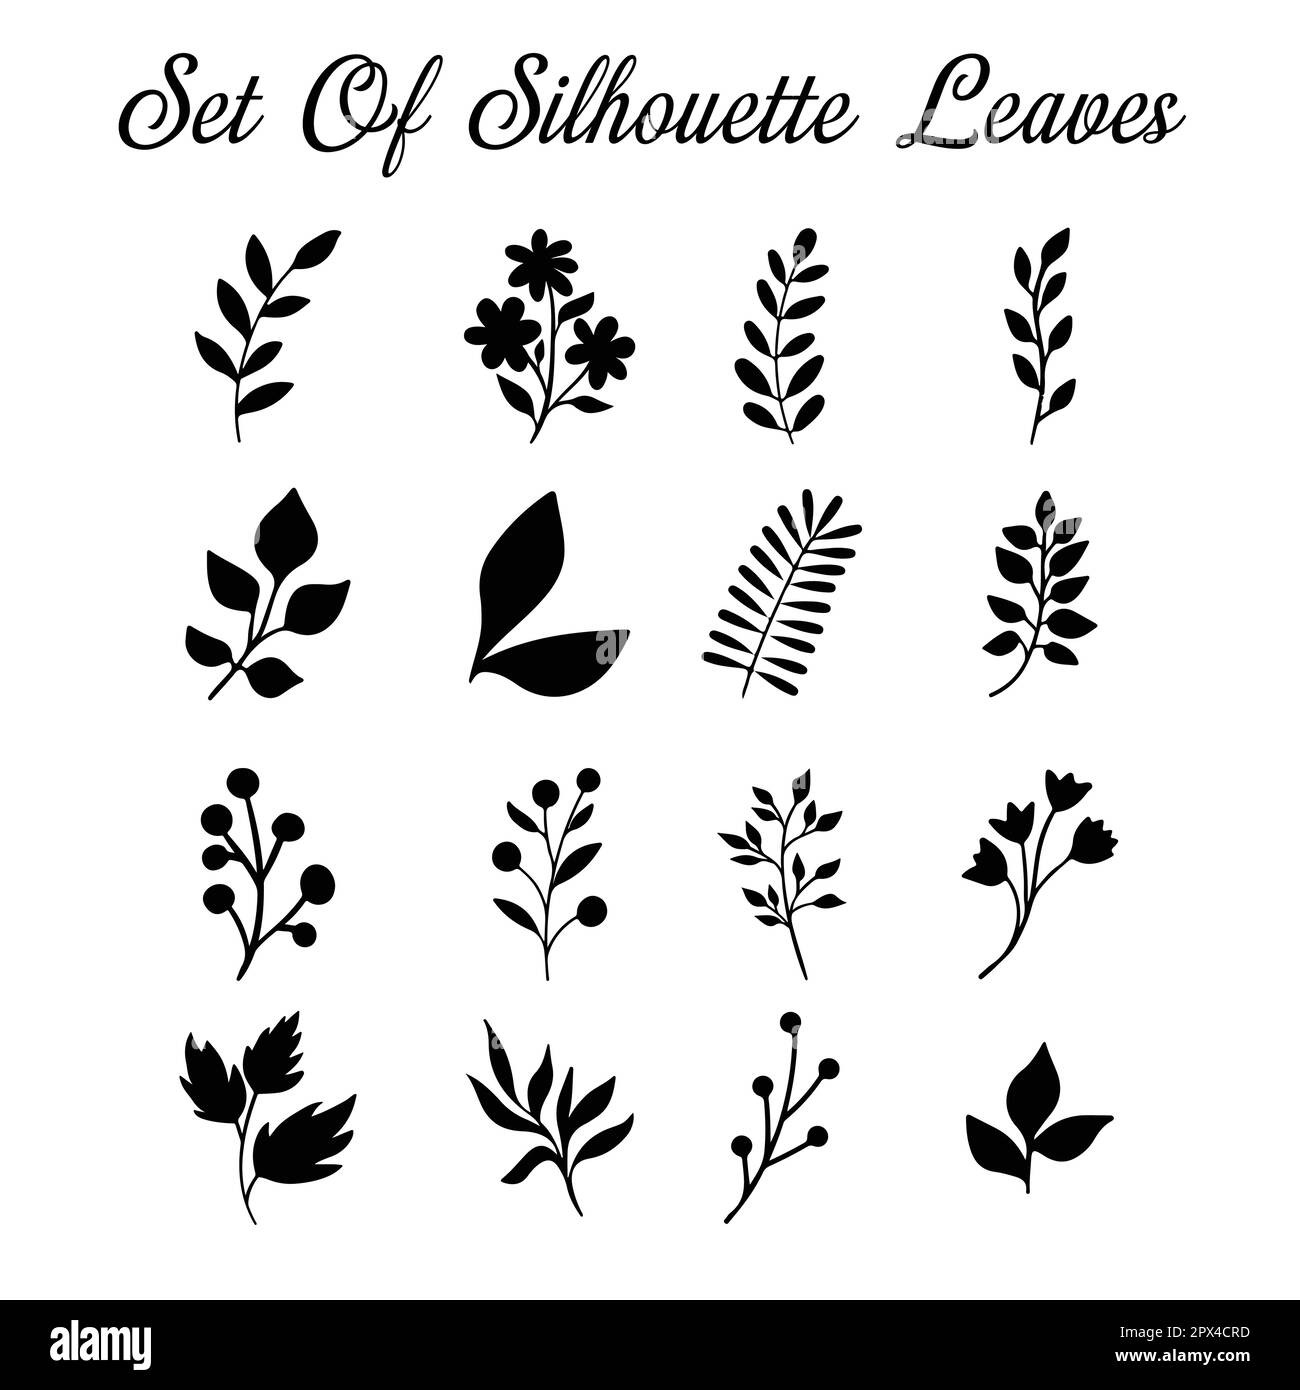 Title Set of tree branches, eucalyptus, palm leaves, herbs and flowers silhouettes Stock Vector